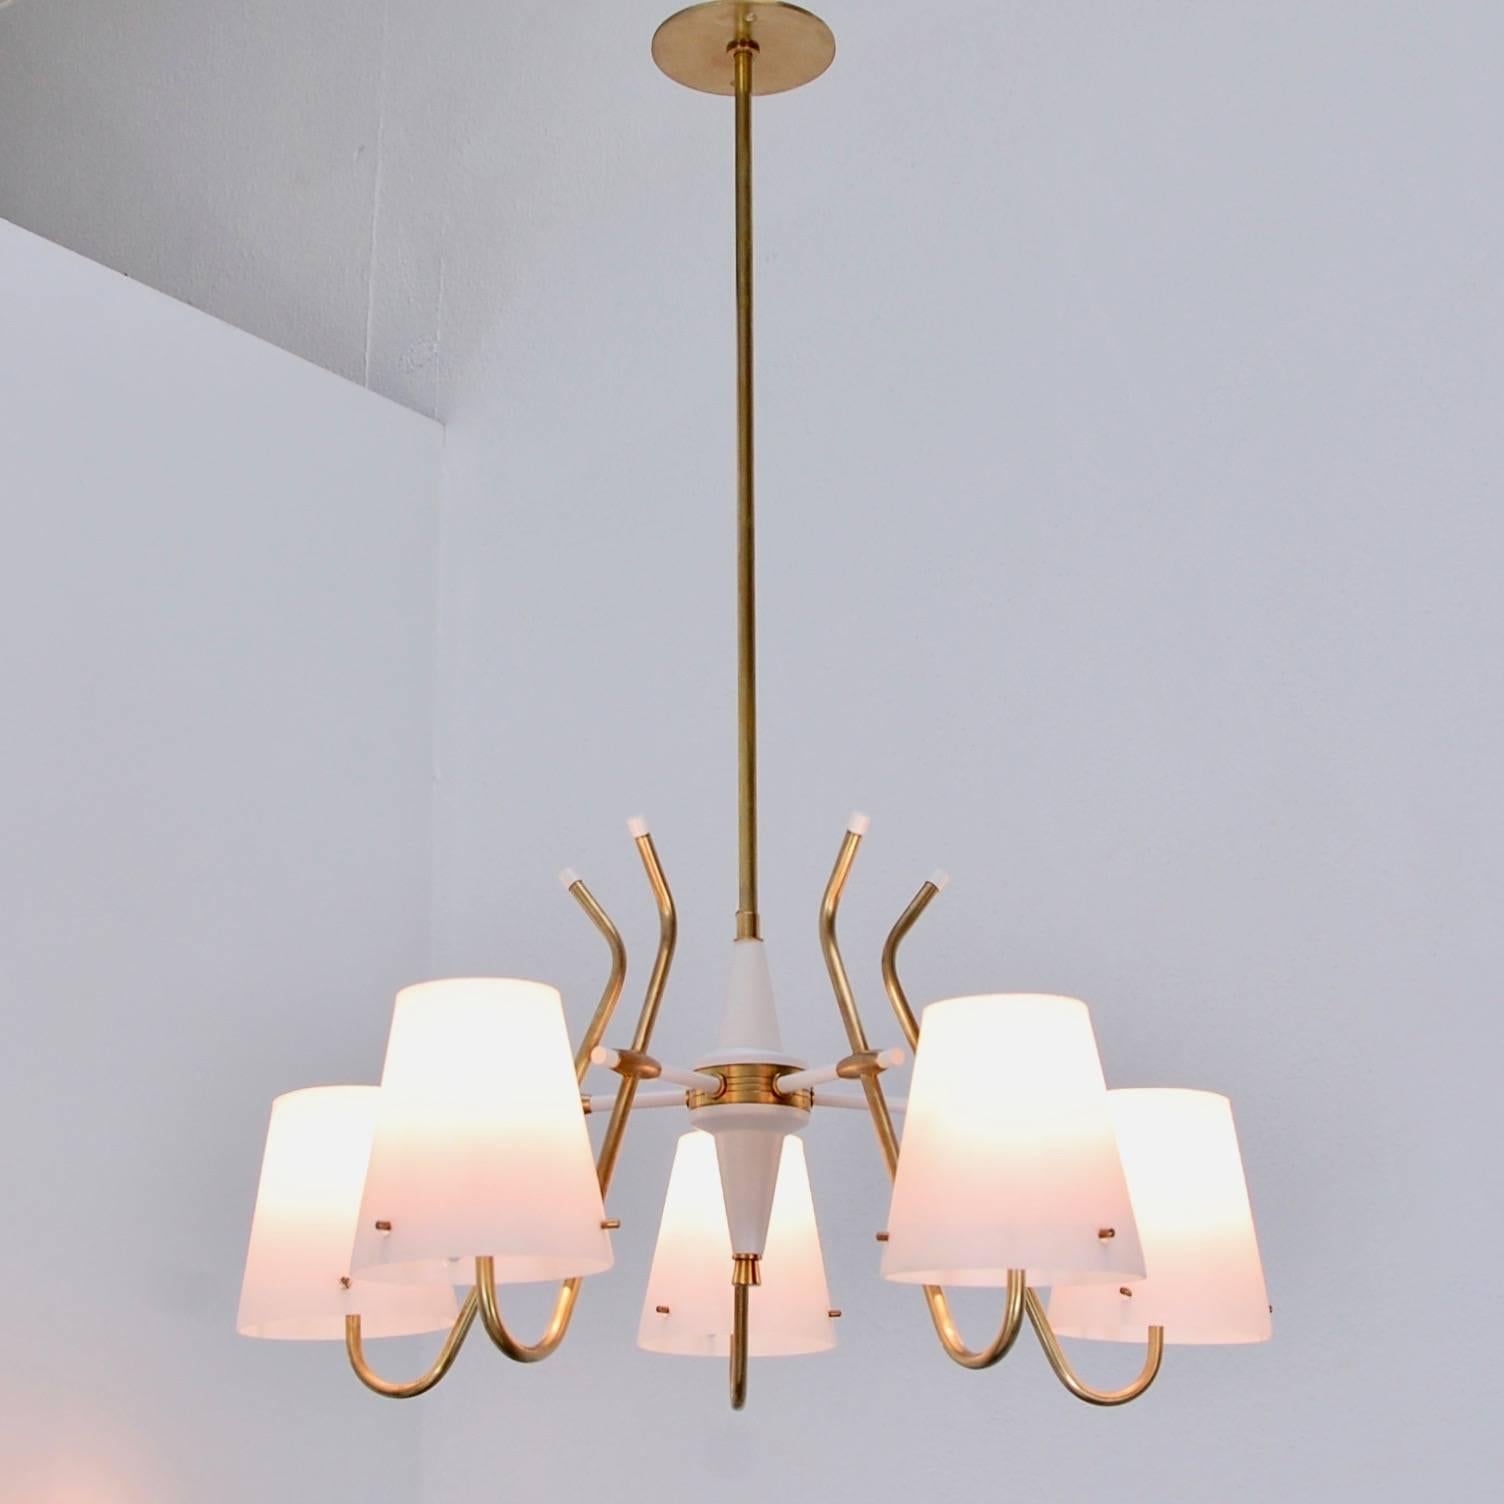 Of the period five shade modern midcentury chandelier from Italy. Fully restored, patinated brass finish, single E12 candelabra based socket per shade, wired for the US. Overall drop adjustable upon request.
Measures: Overall drop 28.5”
Fixture